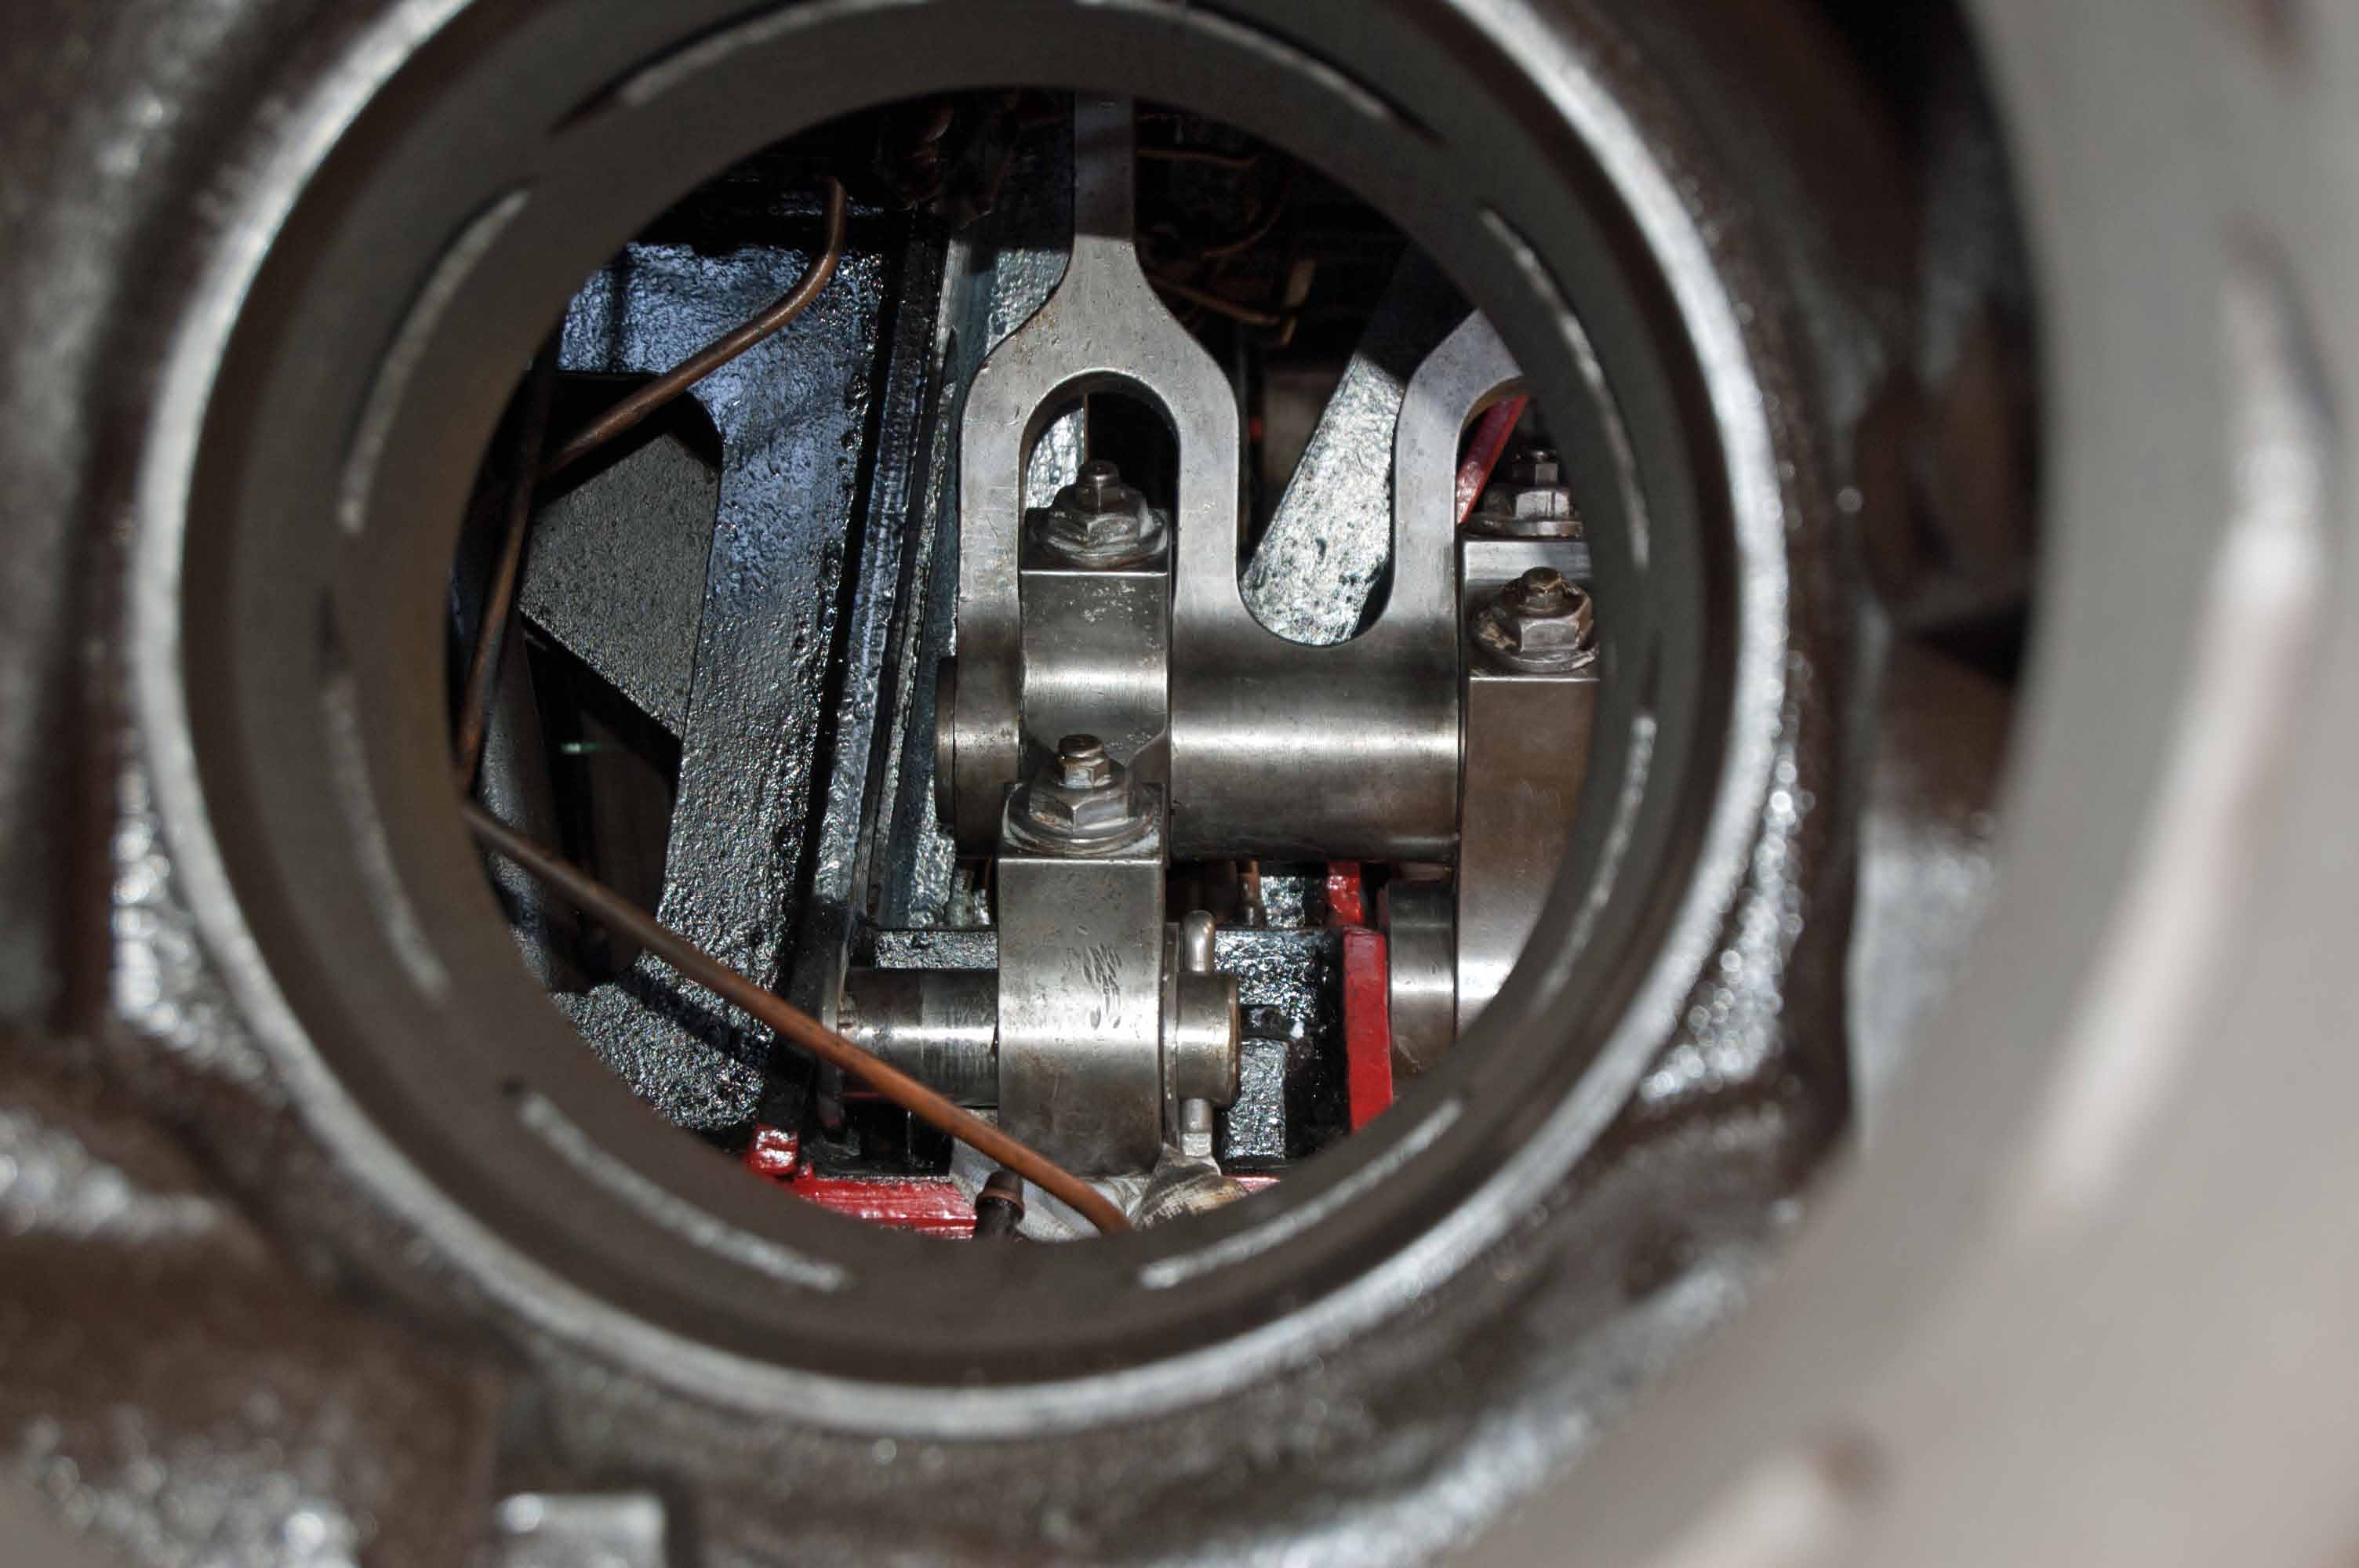 The top of the combination lever, as seen through the valve chest.